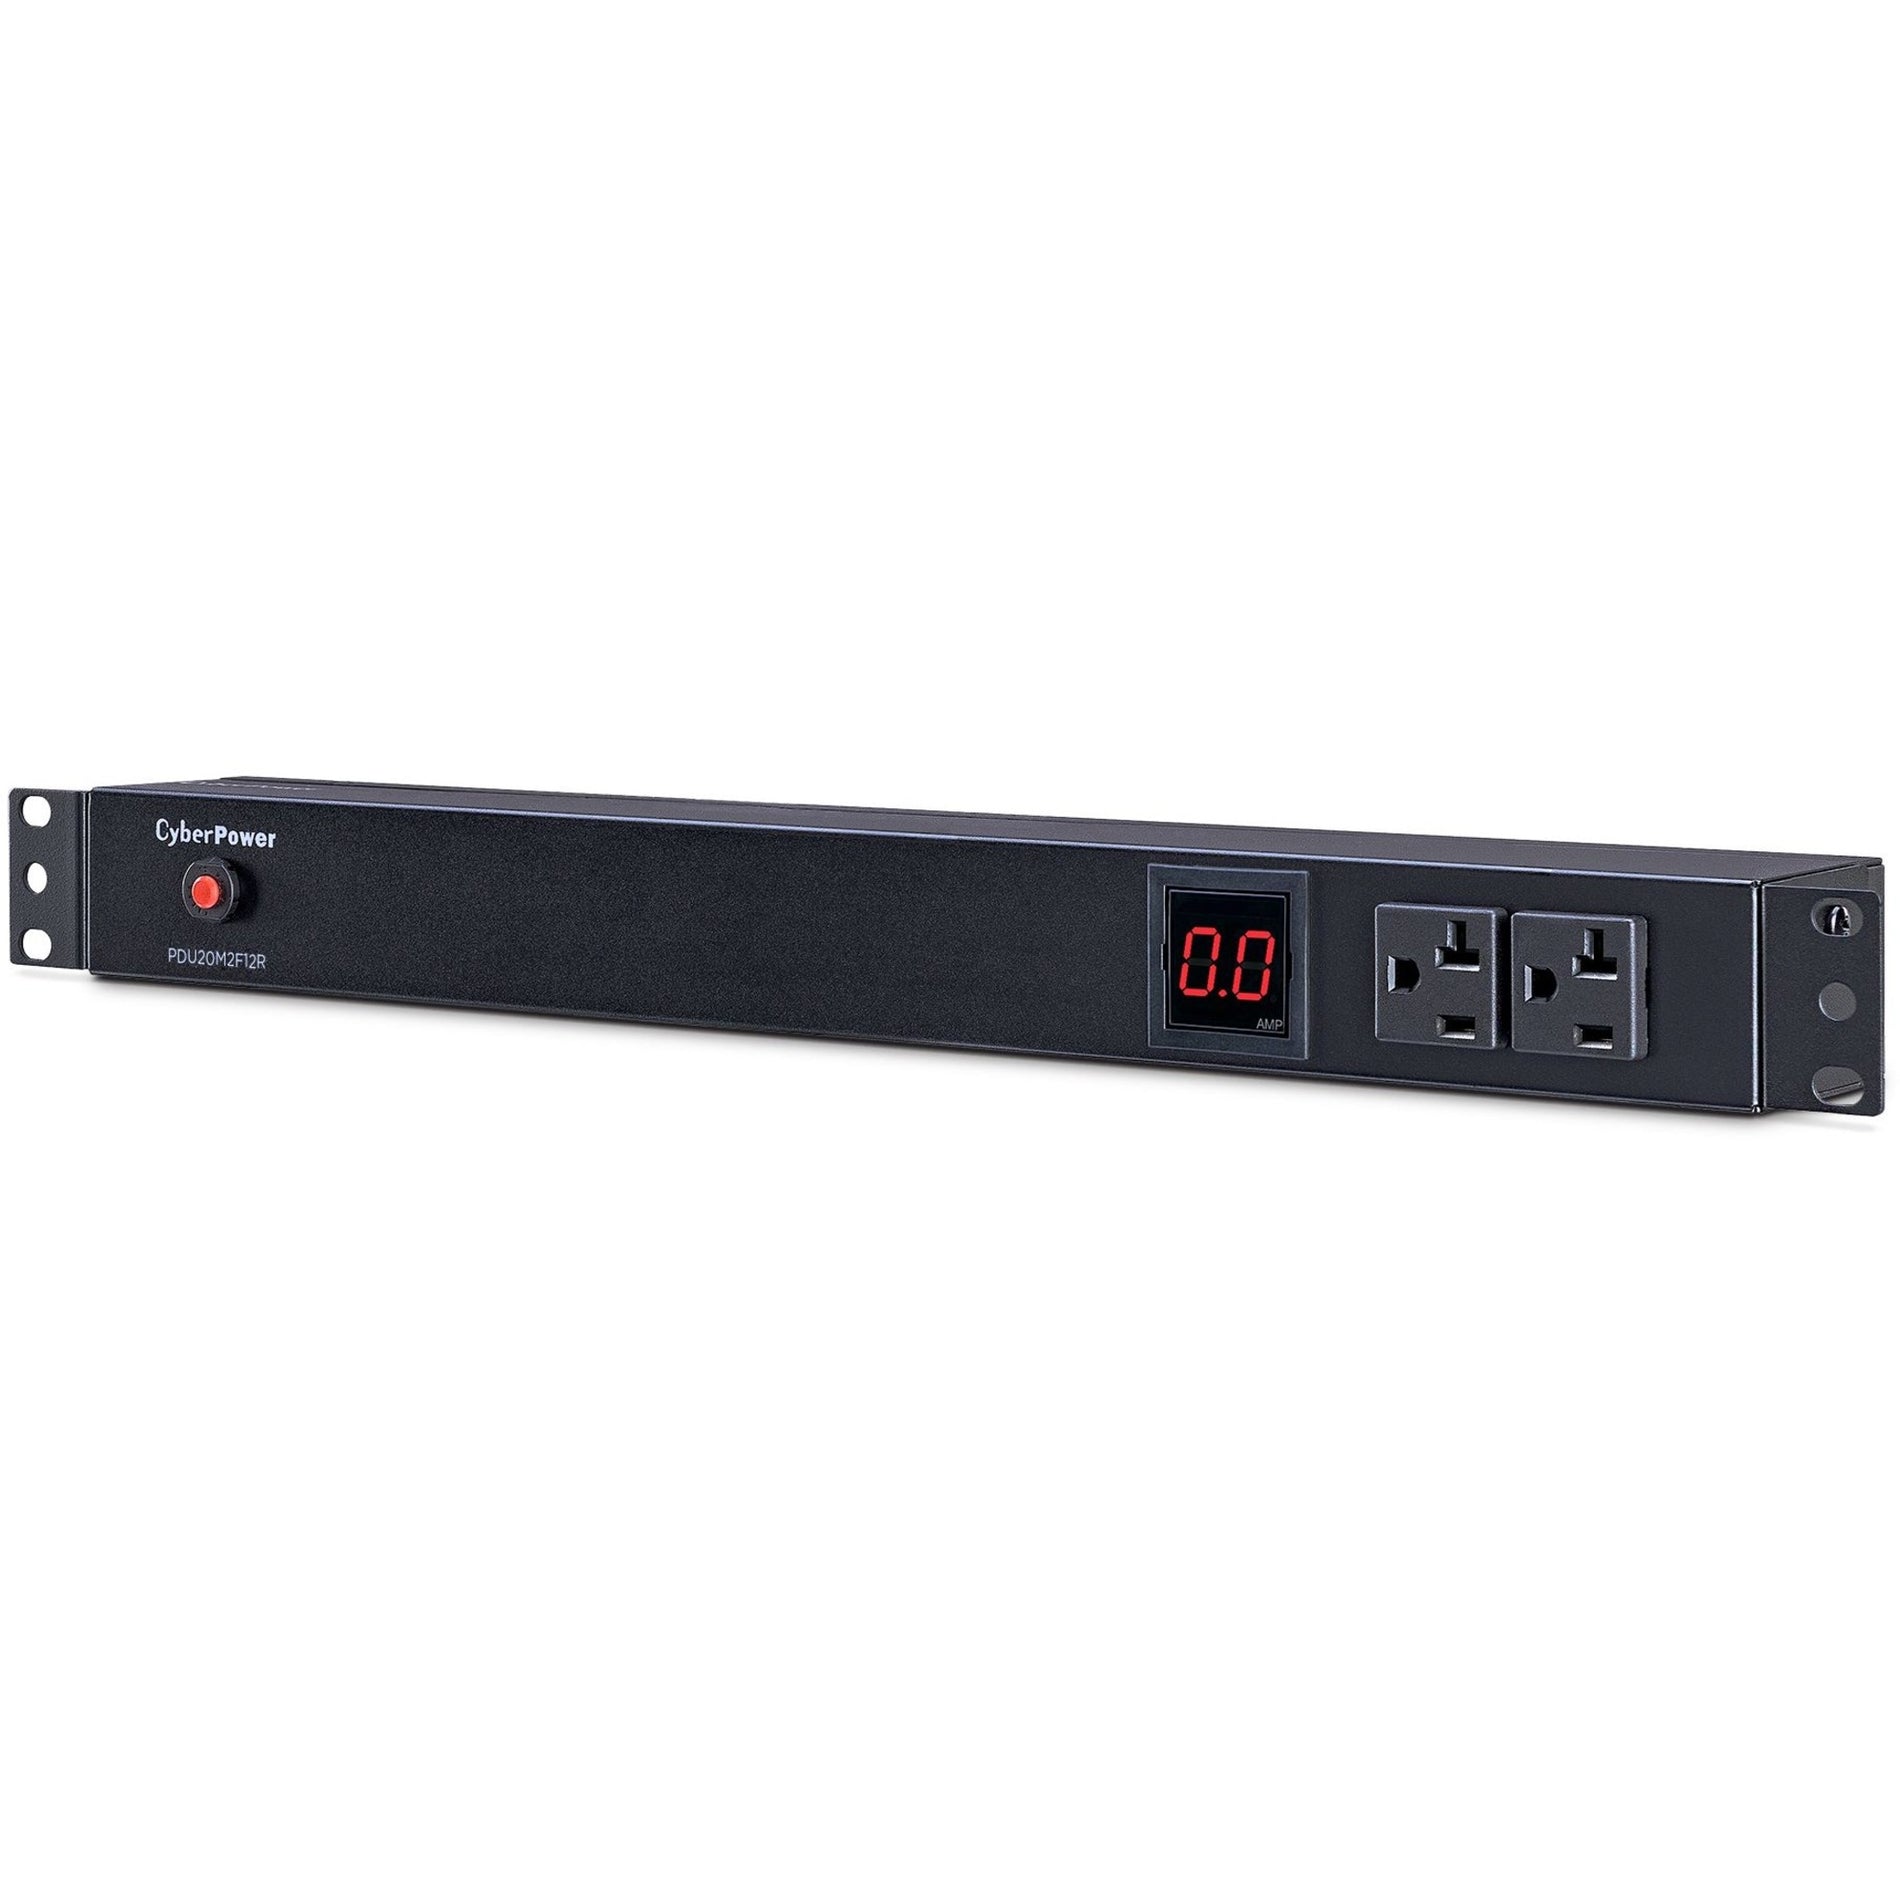 CyberPower PDU20M2F12R Metered PDU 14-Outlets 20A 100-125V AC サイバーパワー PDU20M2F12R メーター付 PDU、14 ソケット、20A、100-125V AC